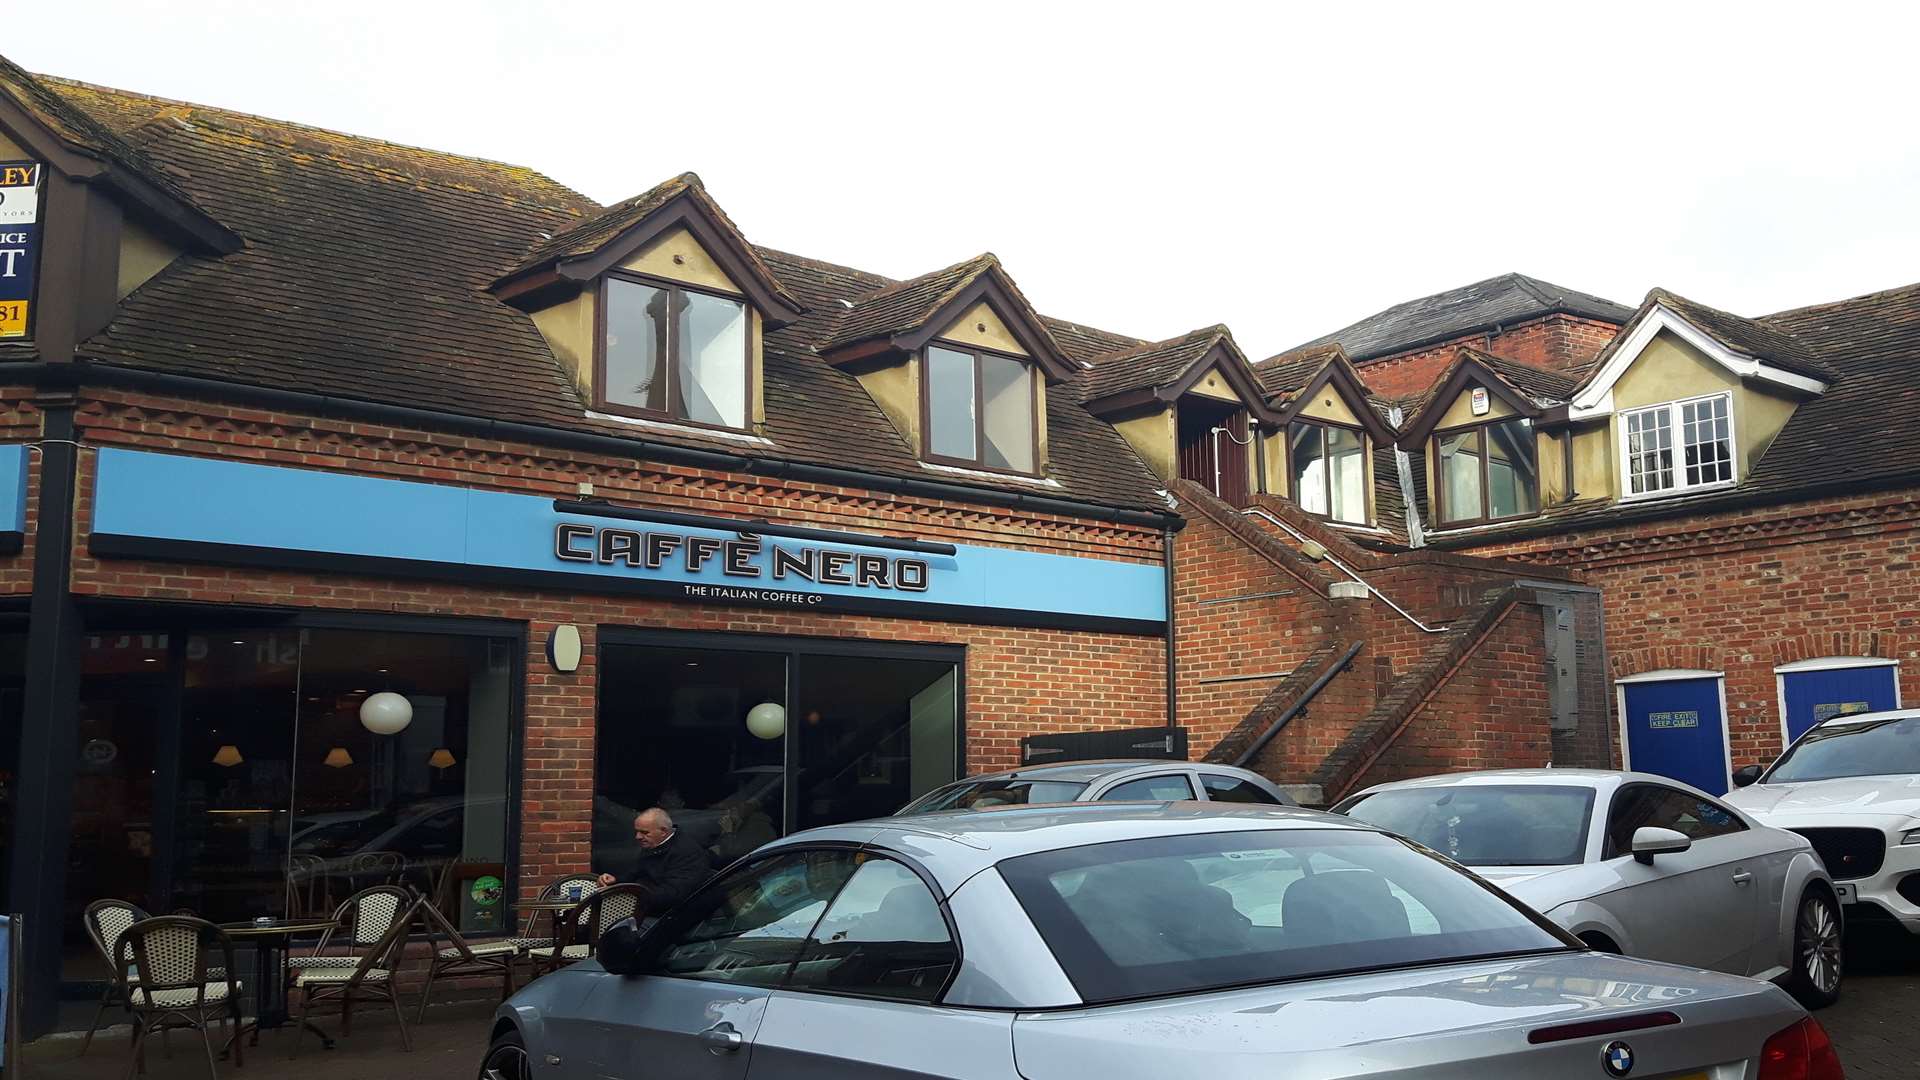 Offices above Caffe Nero are set to be converted.